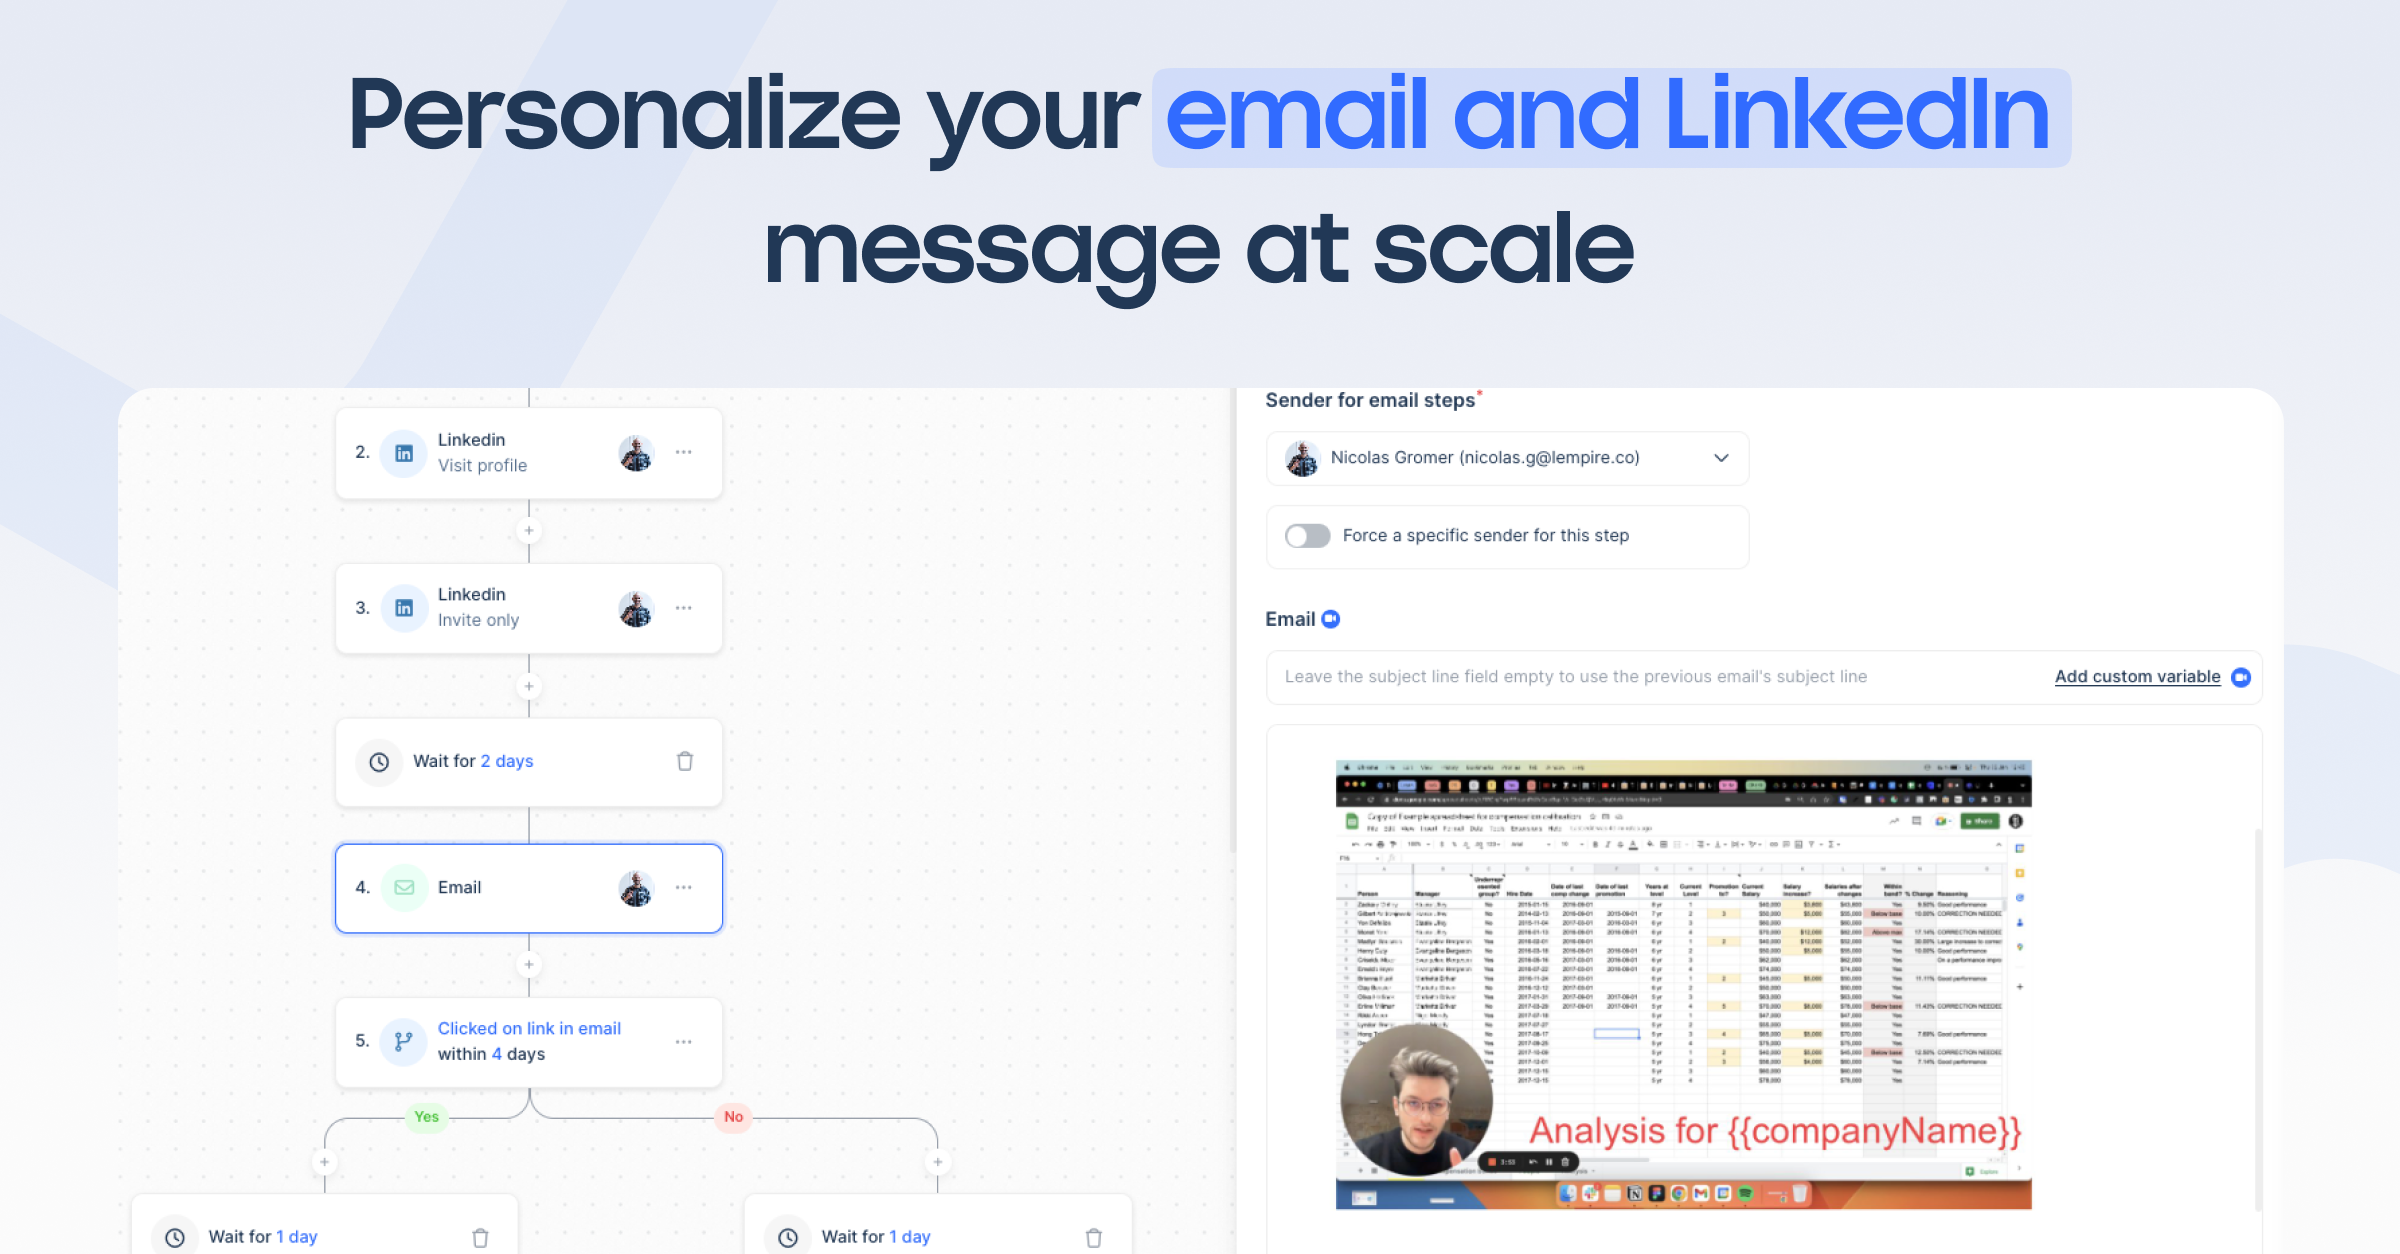 Personalize at scale with custom intro lines, images, dynamic landing pages, text variables and stand out in your prospect’s inbox.